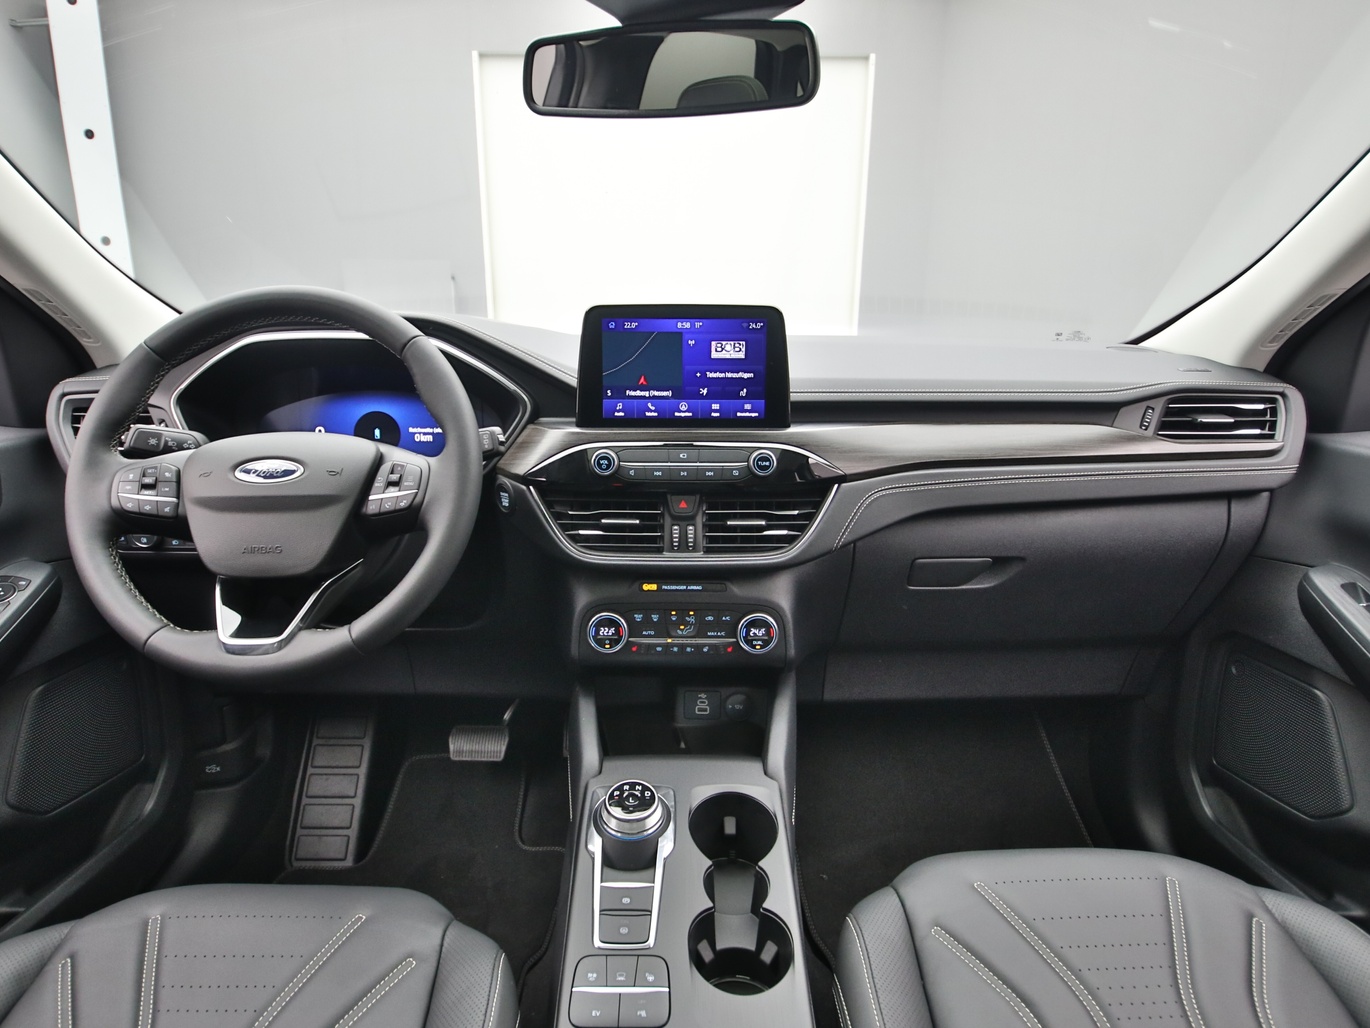  Ford Kuga Vignale 225PS Plug-in-Hybrid Aut. in Weiss 